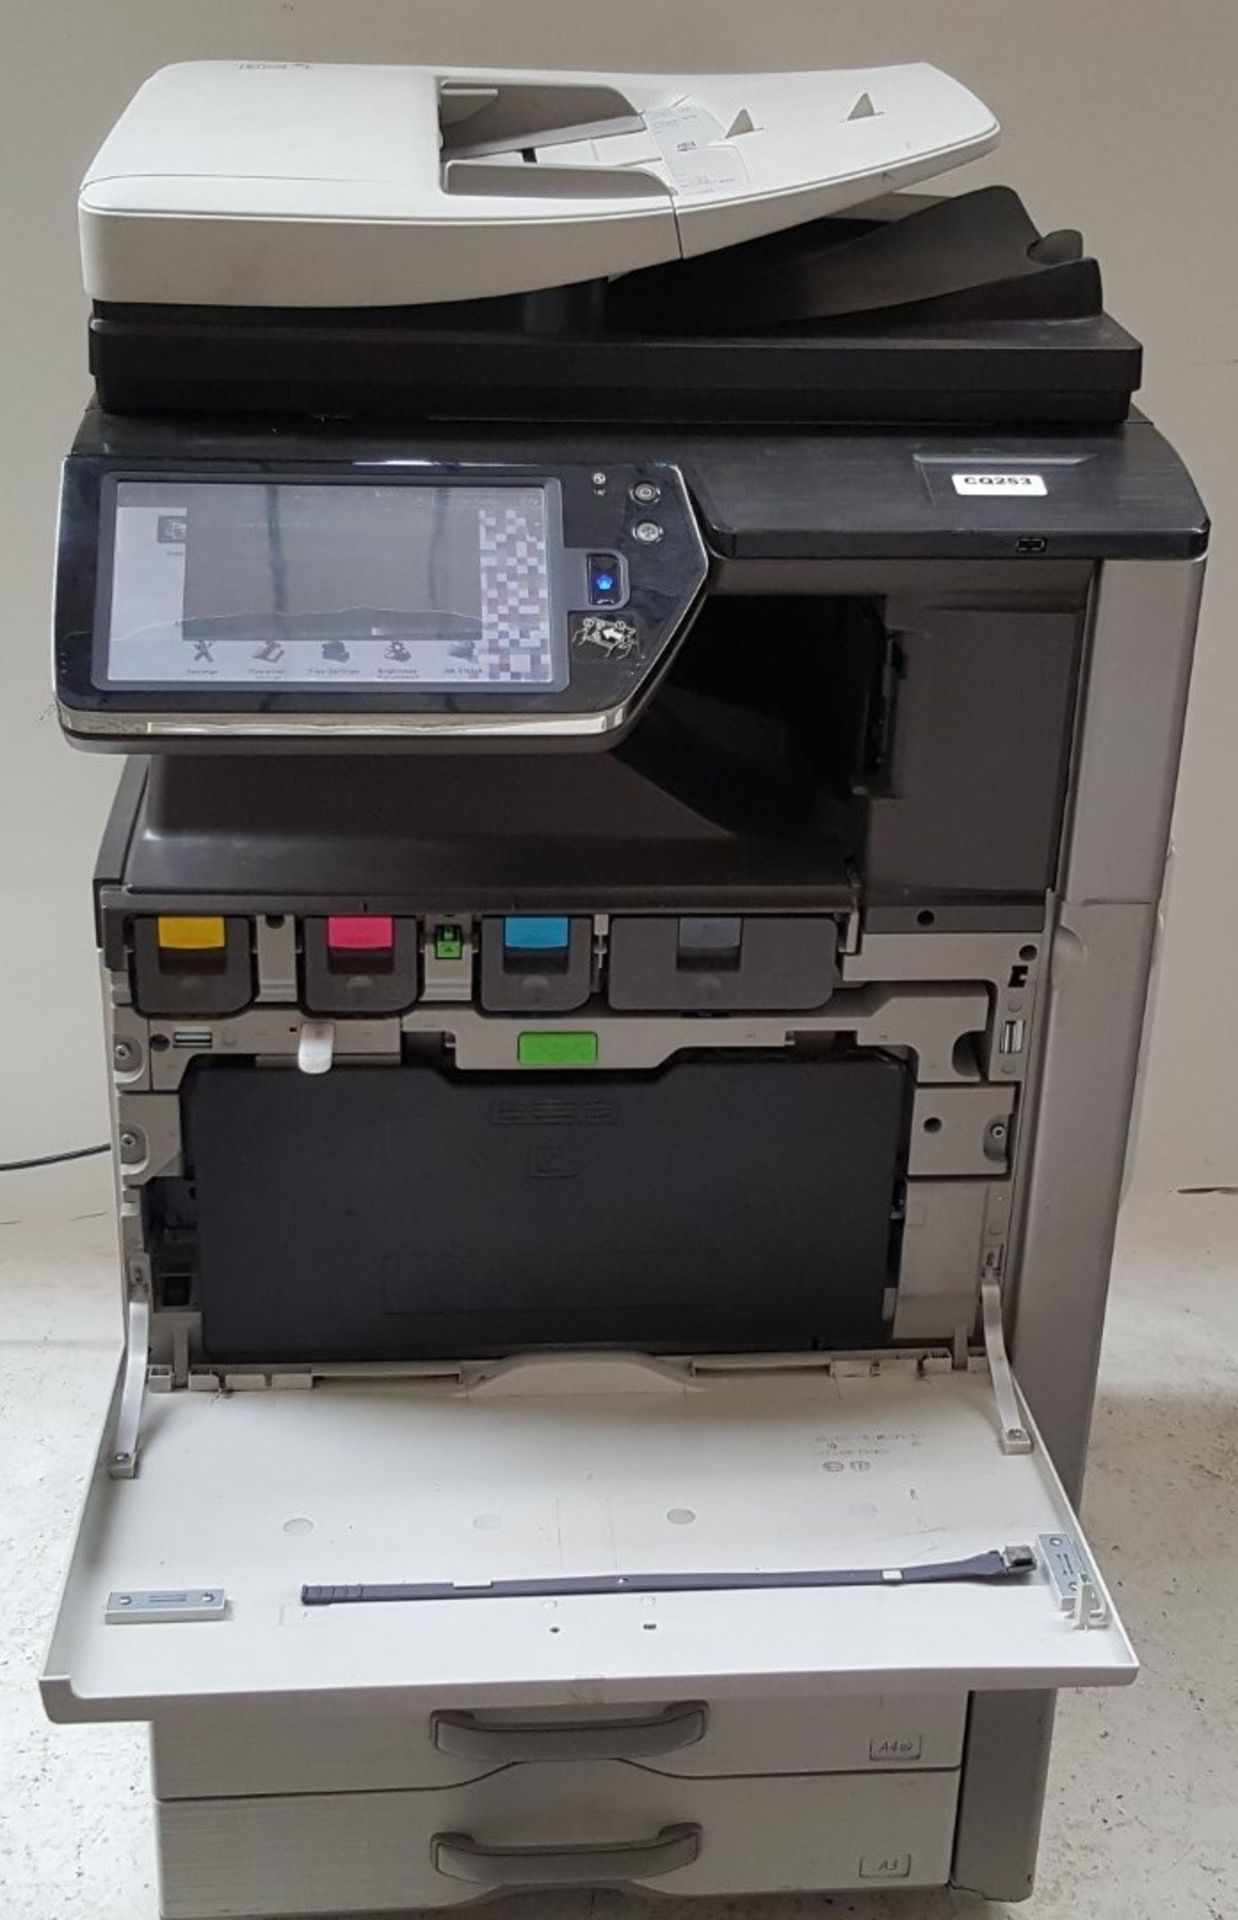 1 x Sharp MX-5112N Digital Copier Office Printer - Tested and Working - Ref CQ253 - CL422 - - Image 5 of 7